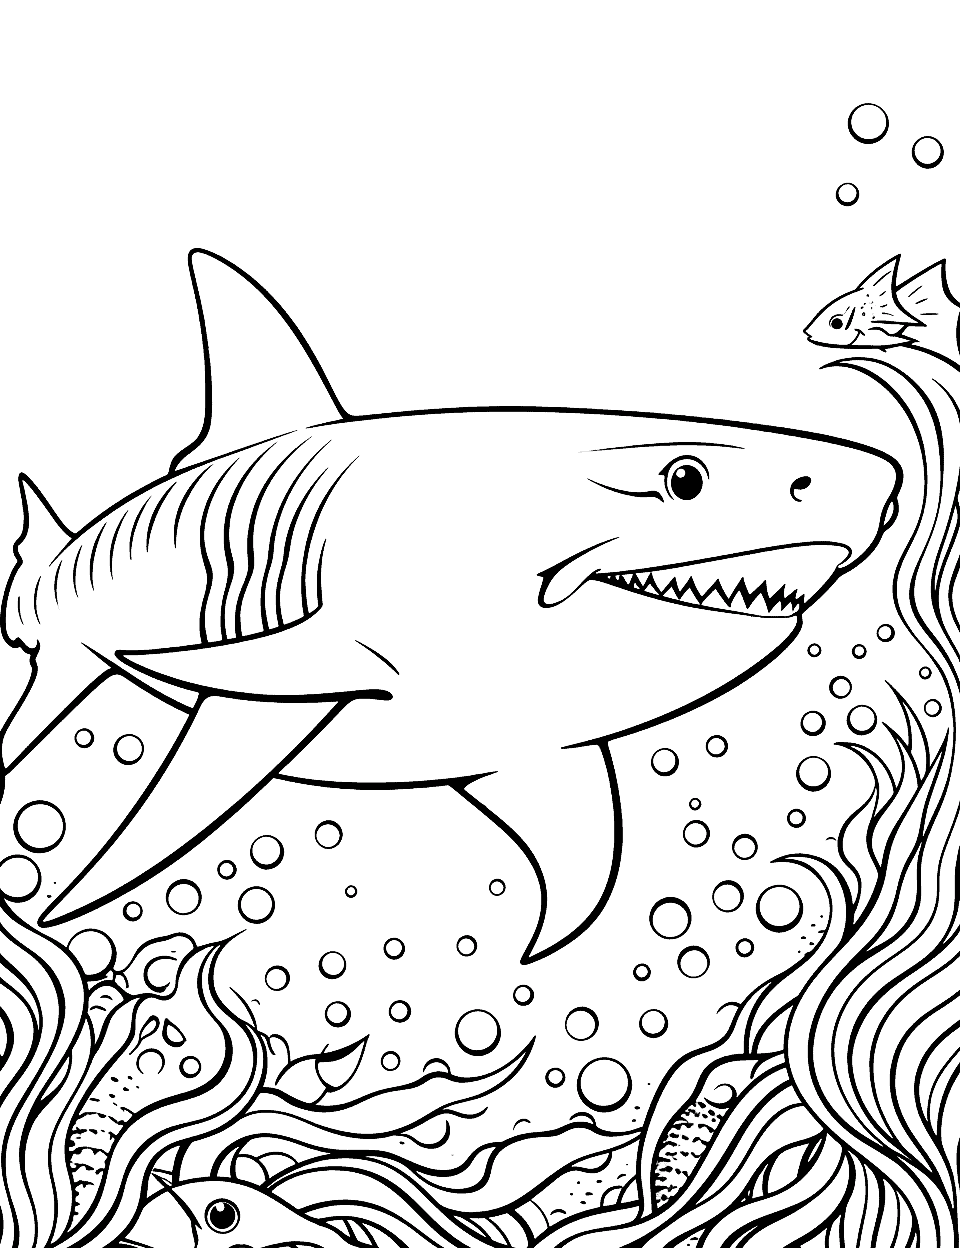 Reef Shark Camouflage Coloring Page - A reef shark camouflaging with the ocean floor.